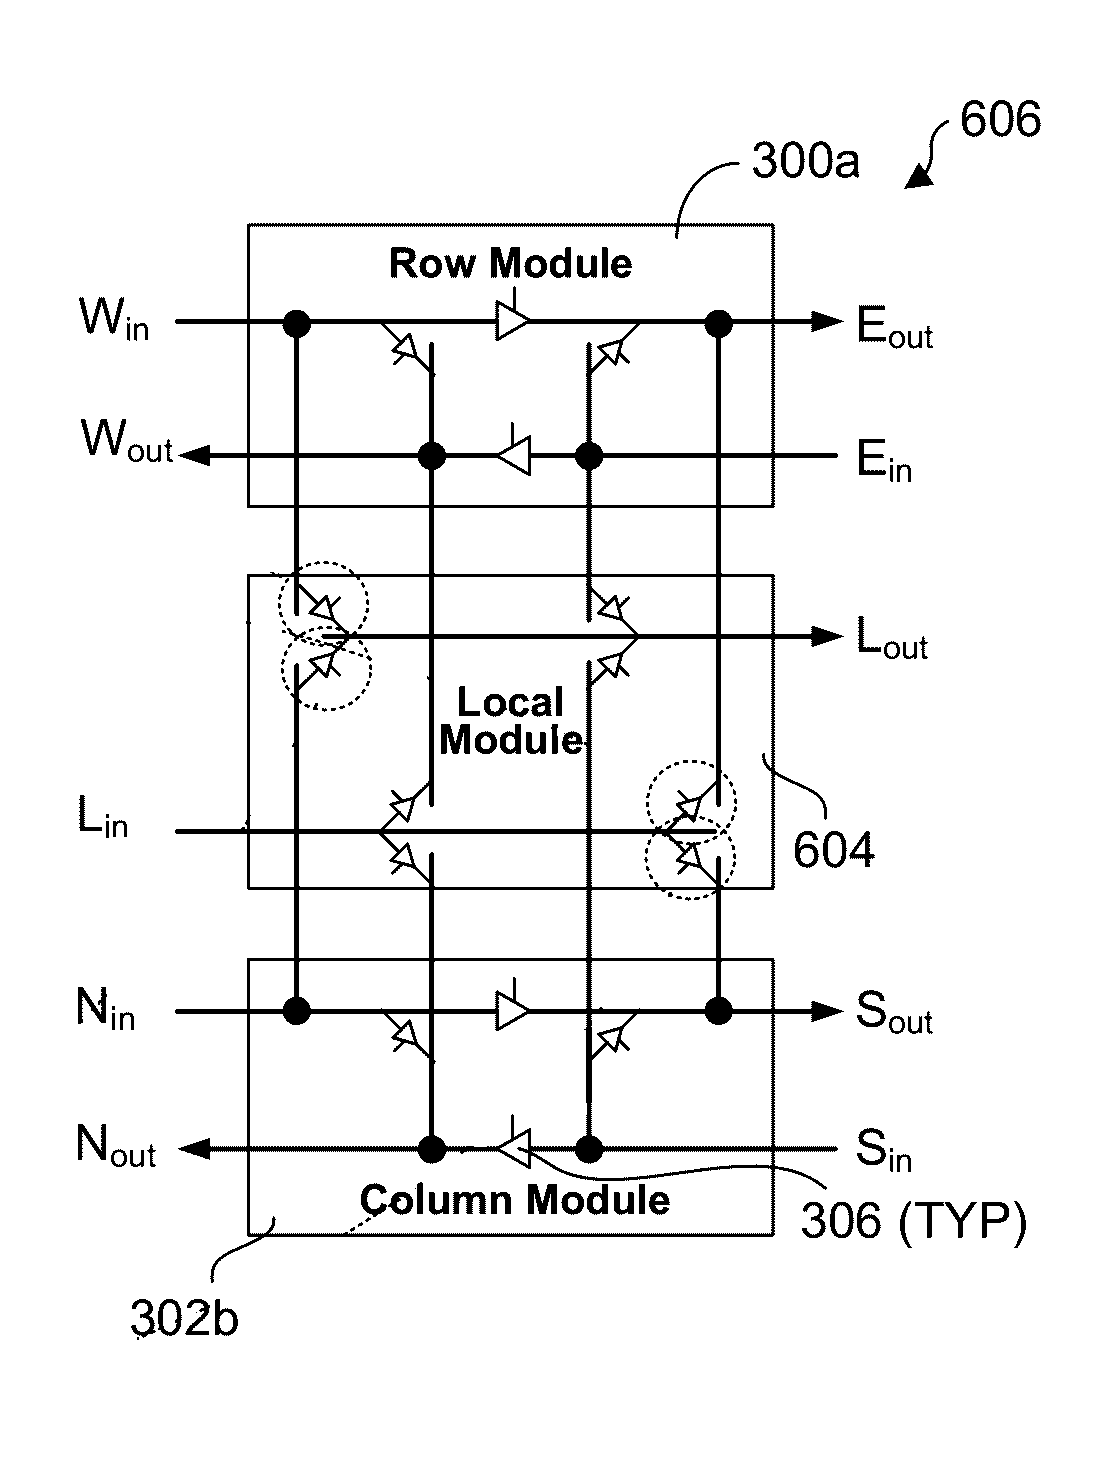 Modular decoupled crossbar for on-chip router